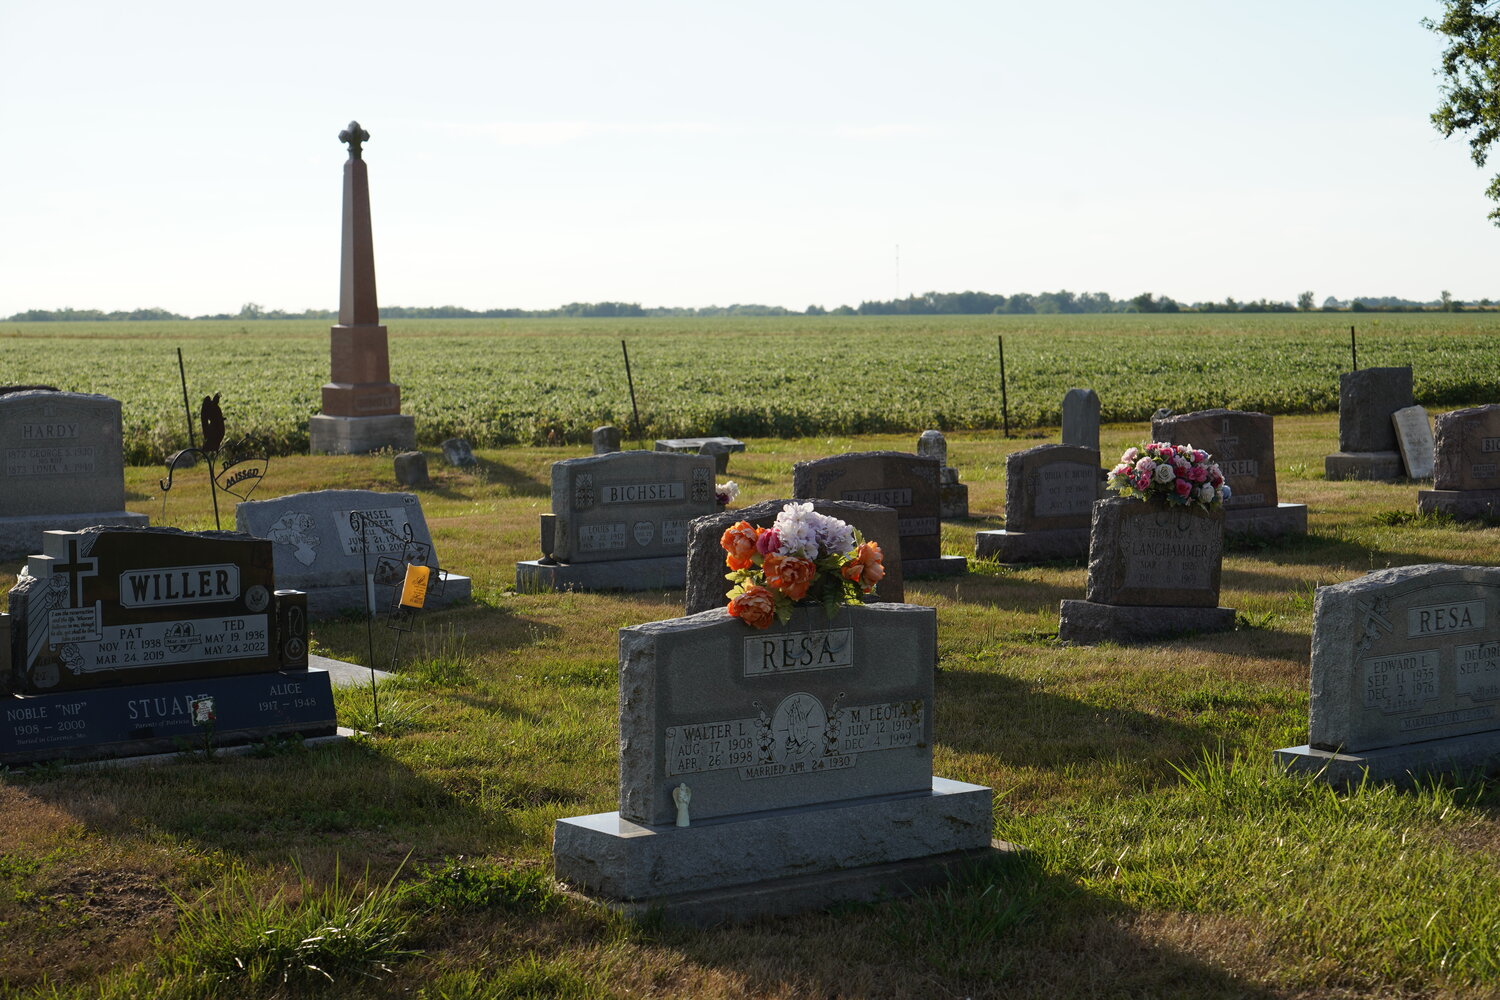 The sun shines after a storm, in St. Michael Cemetery in Hager's Grove.